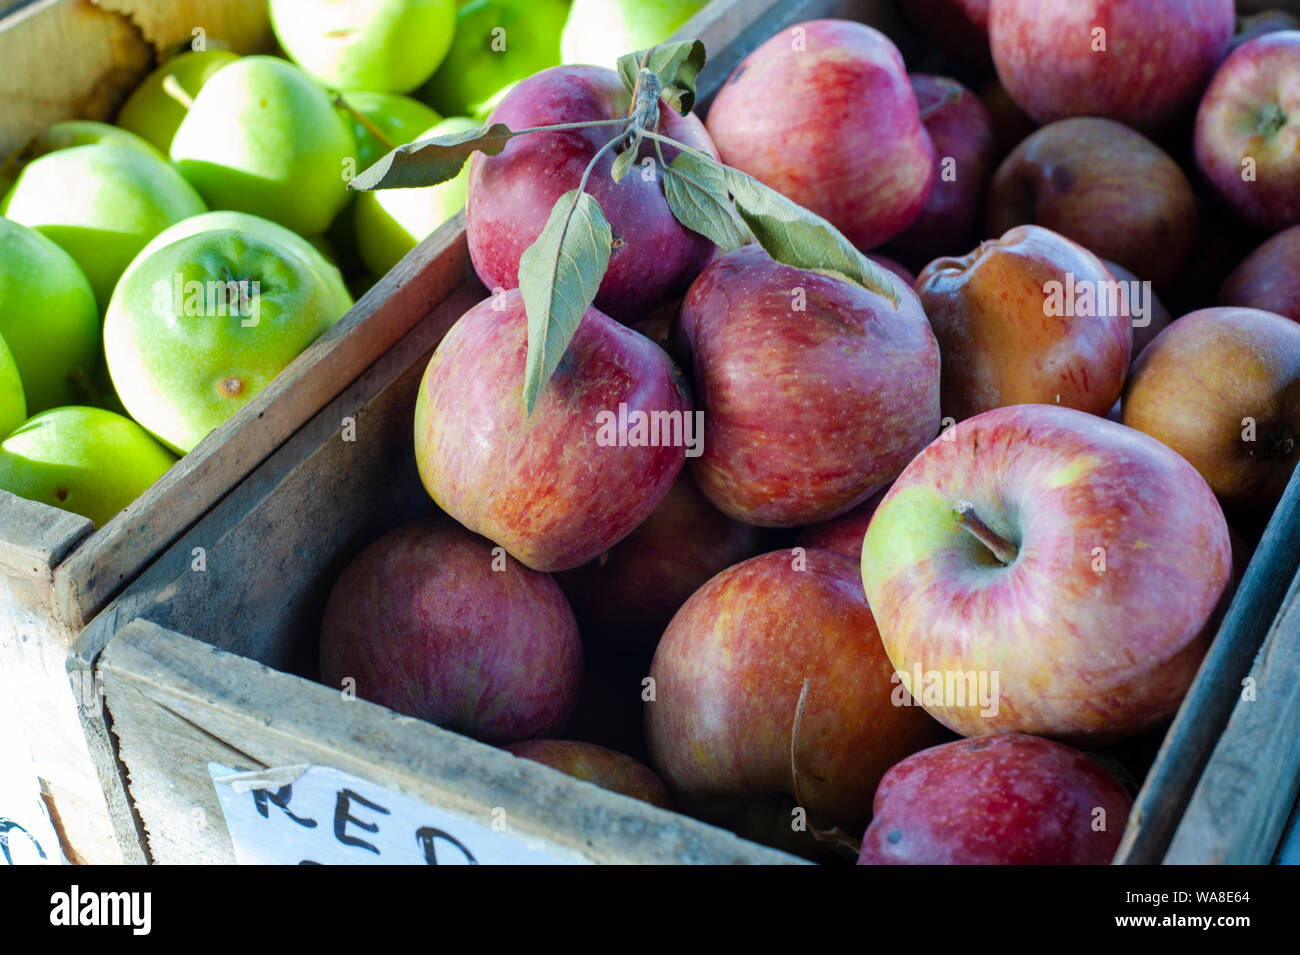 Organic apples for sale at a farmers market, Red Delicious and green Granny Smith apples are both popular varieties in Australia Stock Photo